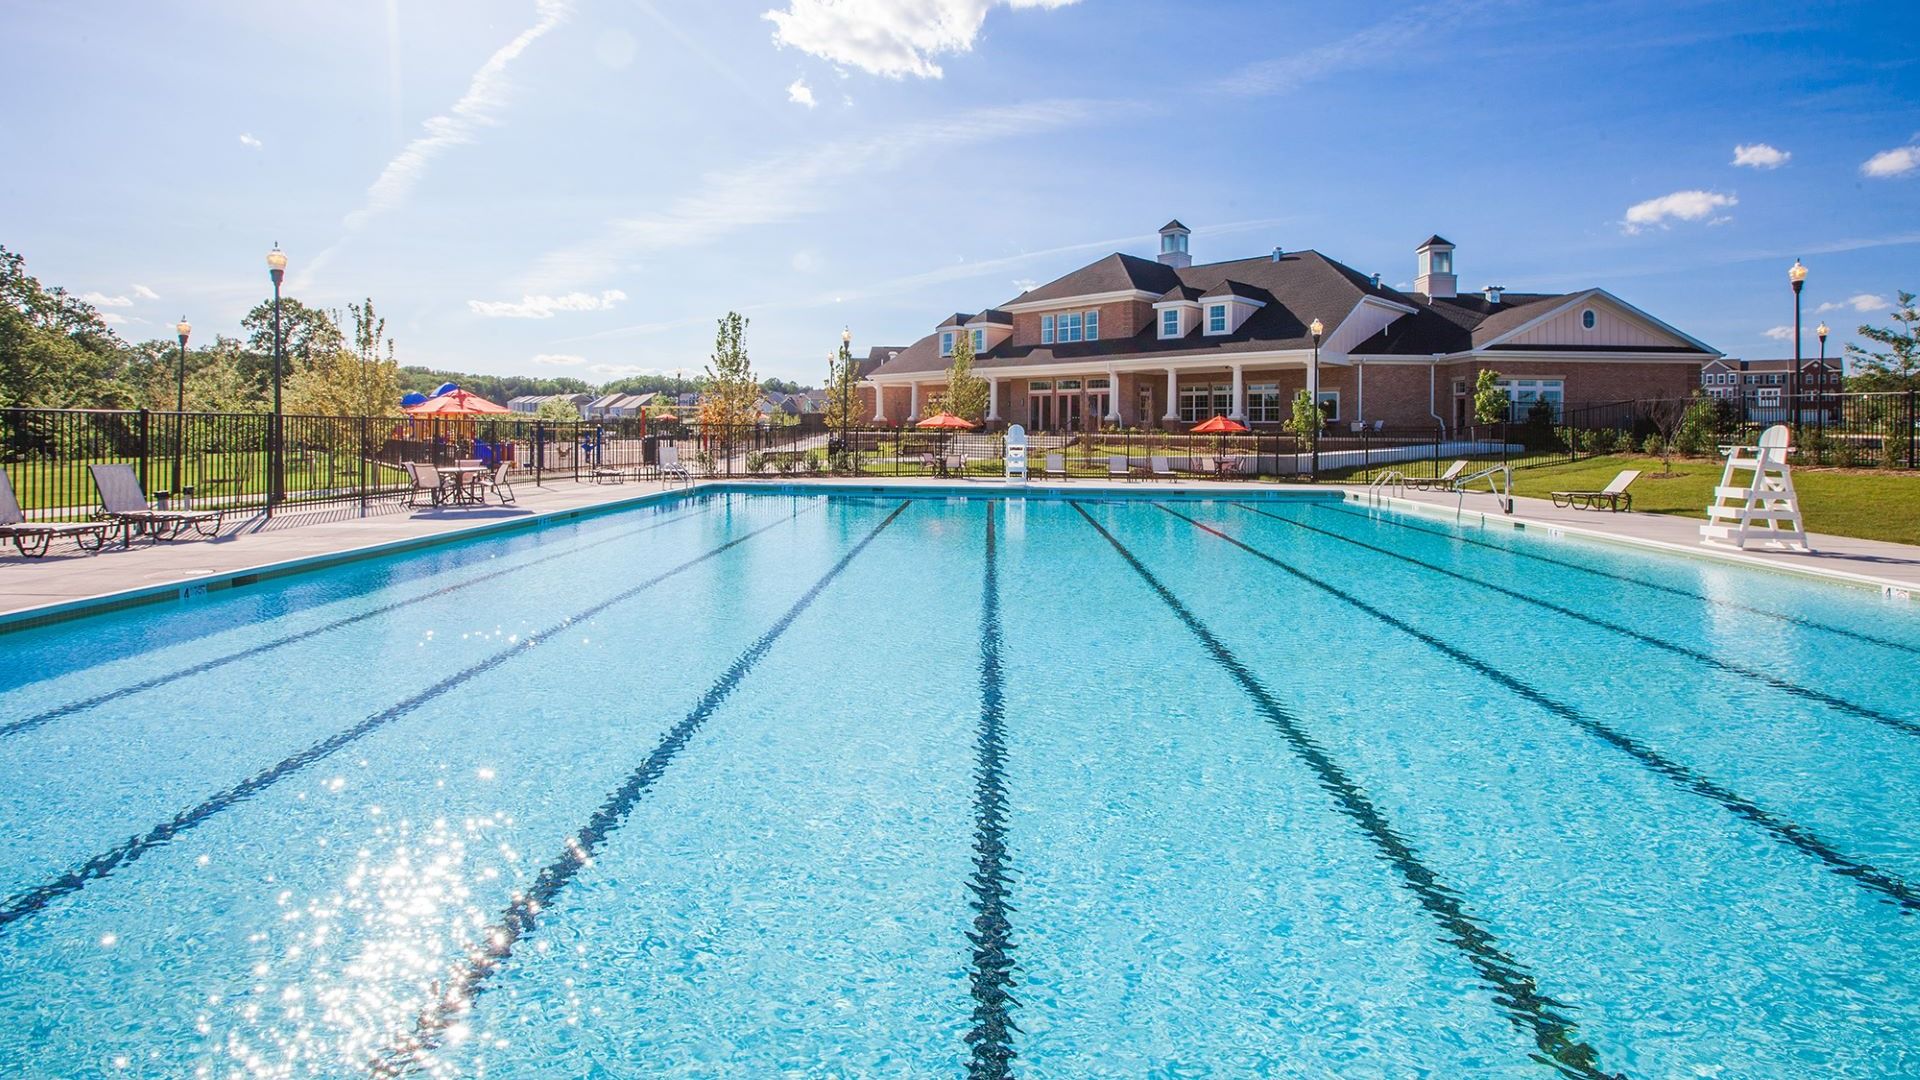 Clubhouse Pool:Stunning Pool with Loungers Located at the Clubhouse in the Parkside Community